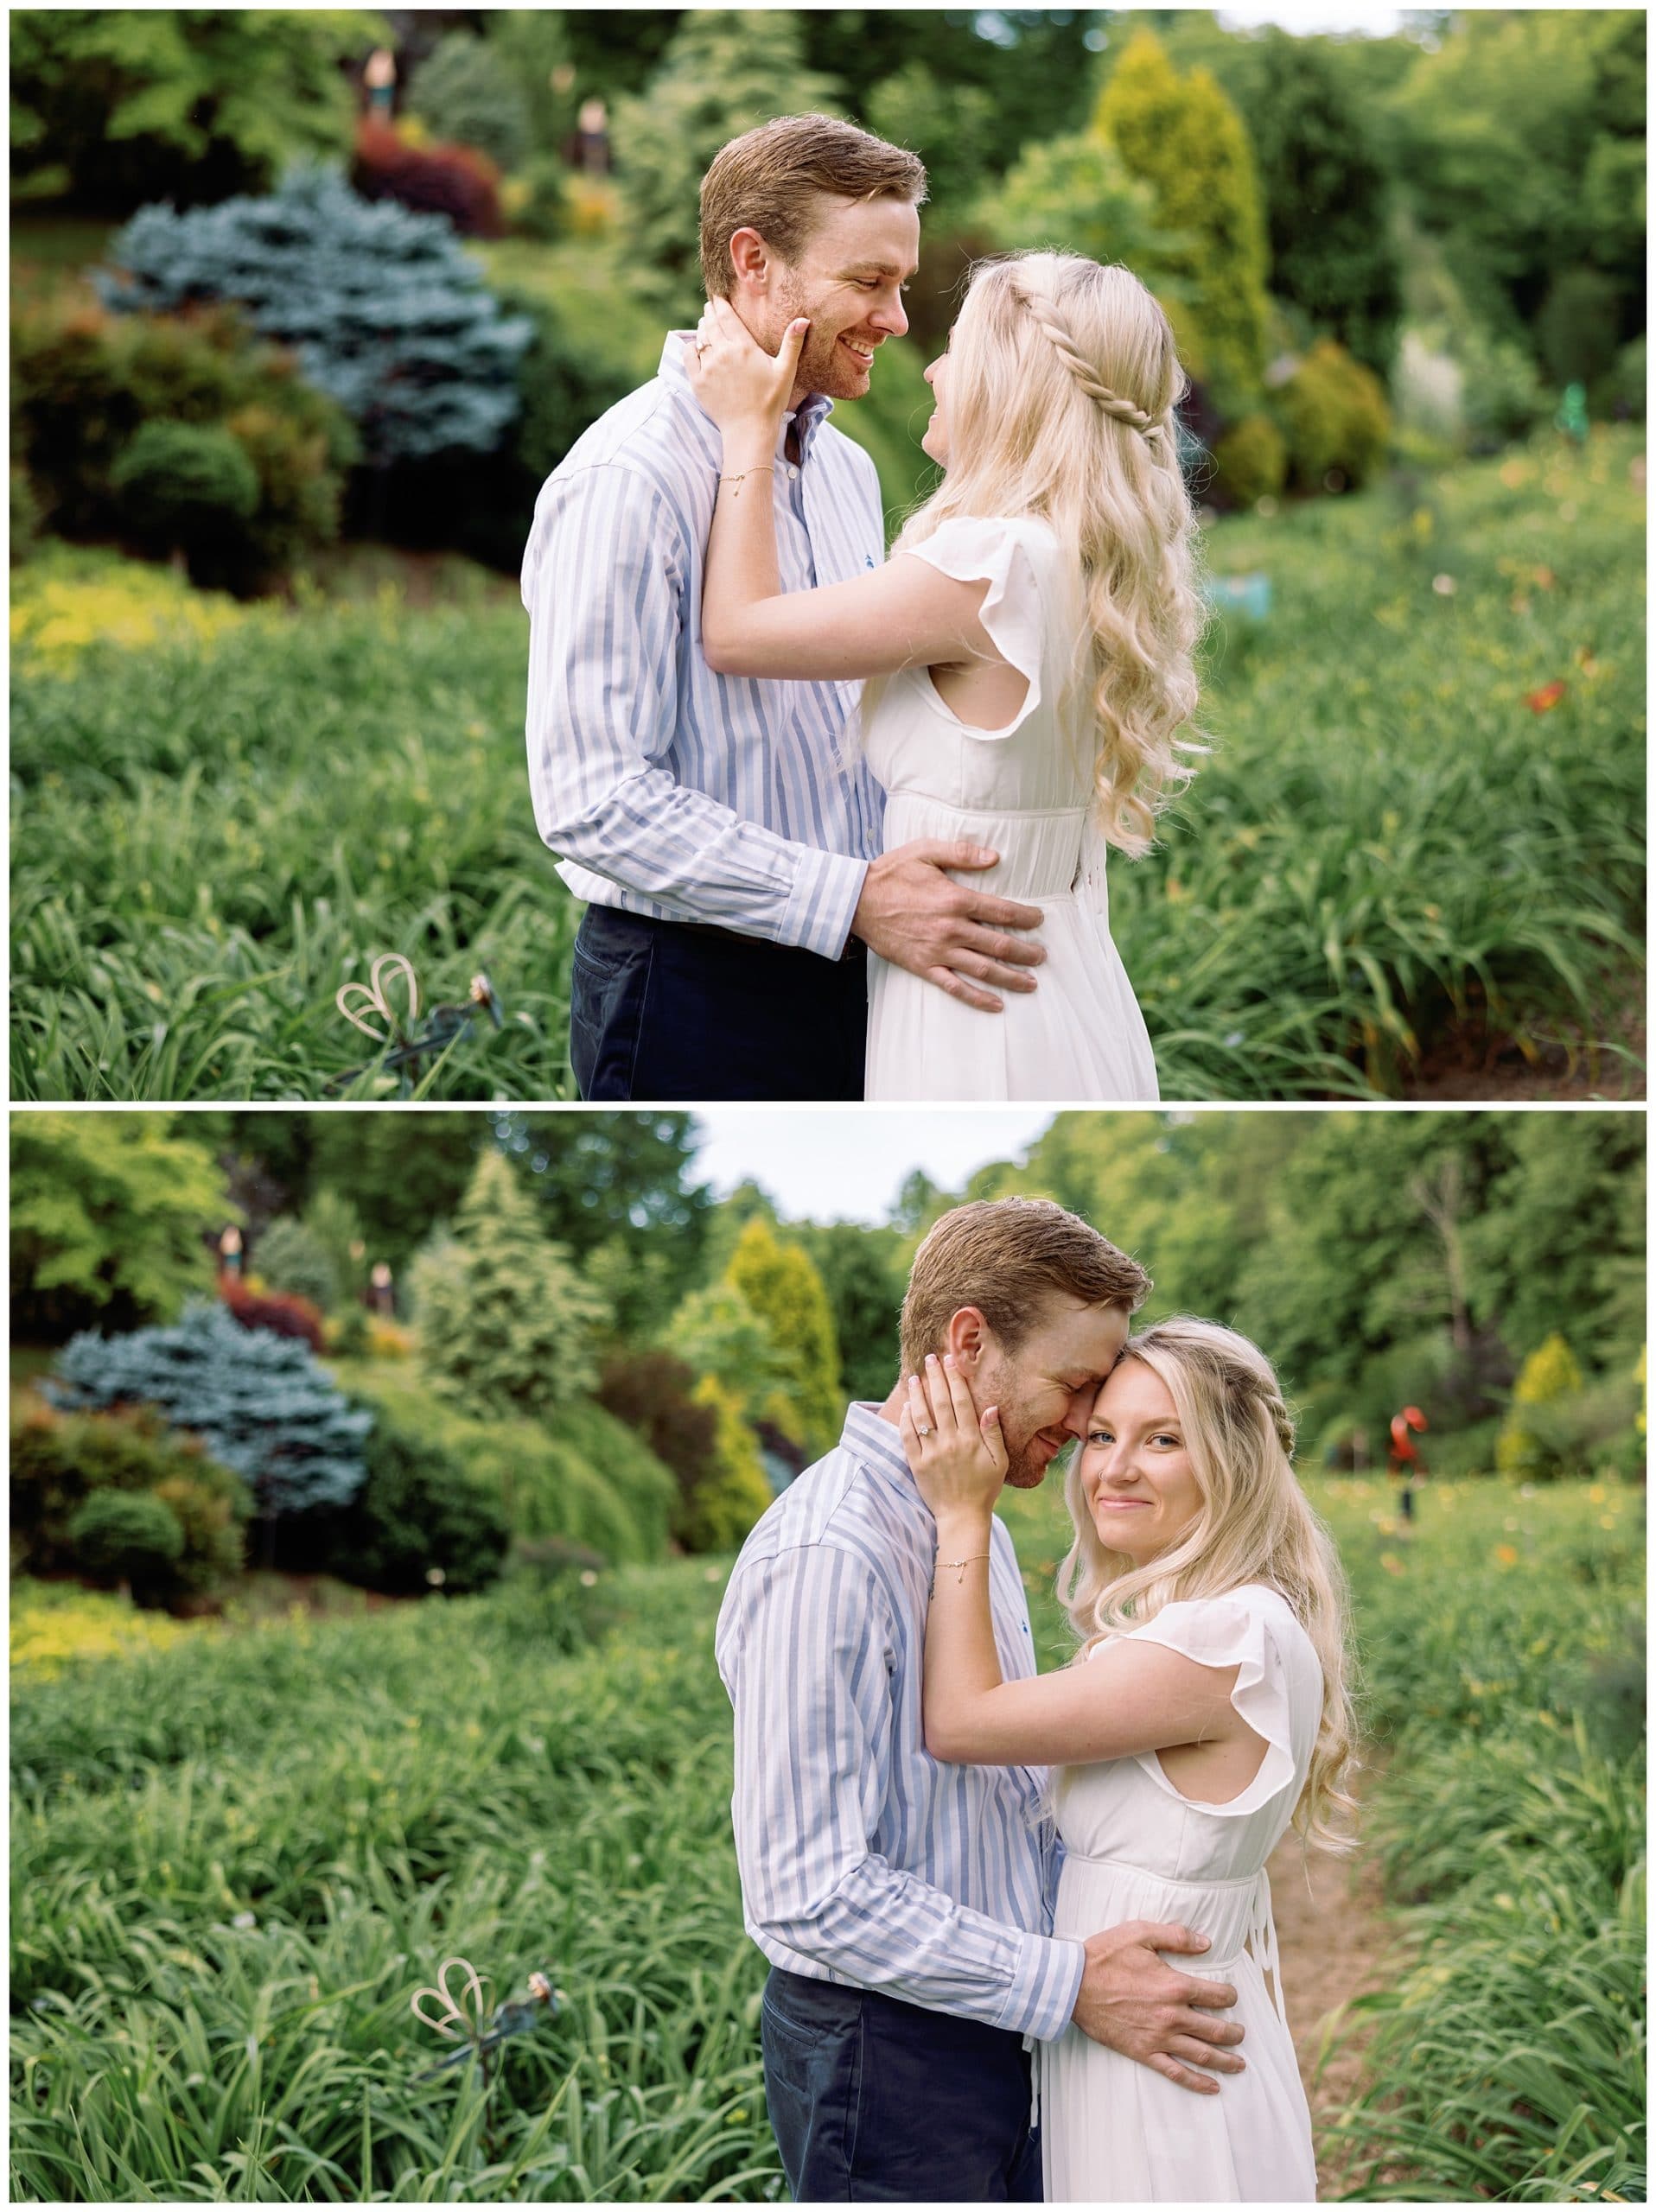 Variation of pose at your engagement session by Kathy Beaver.